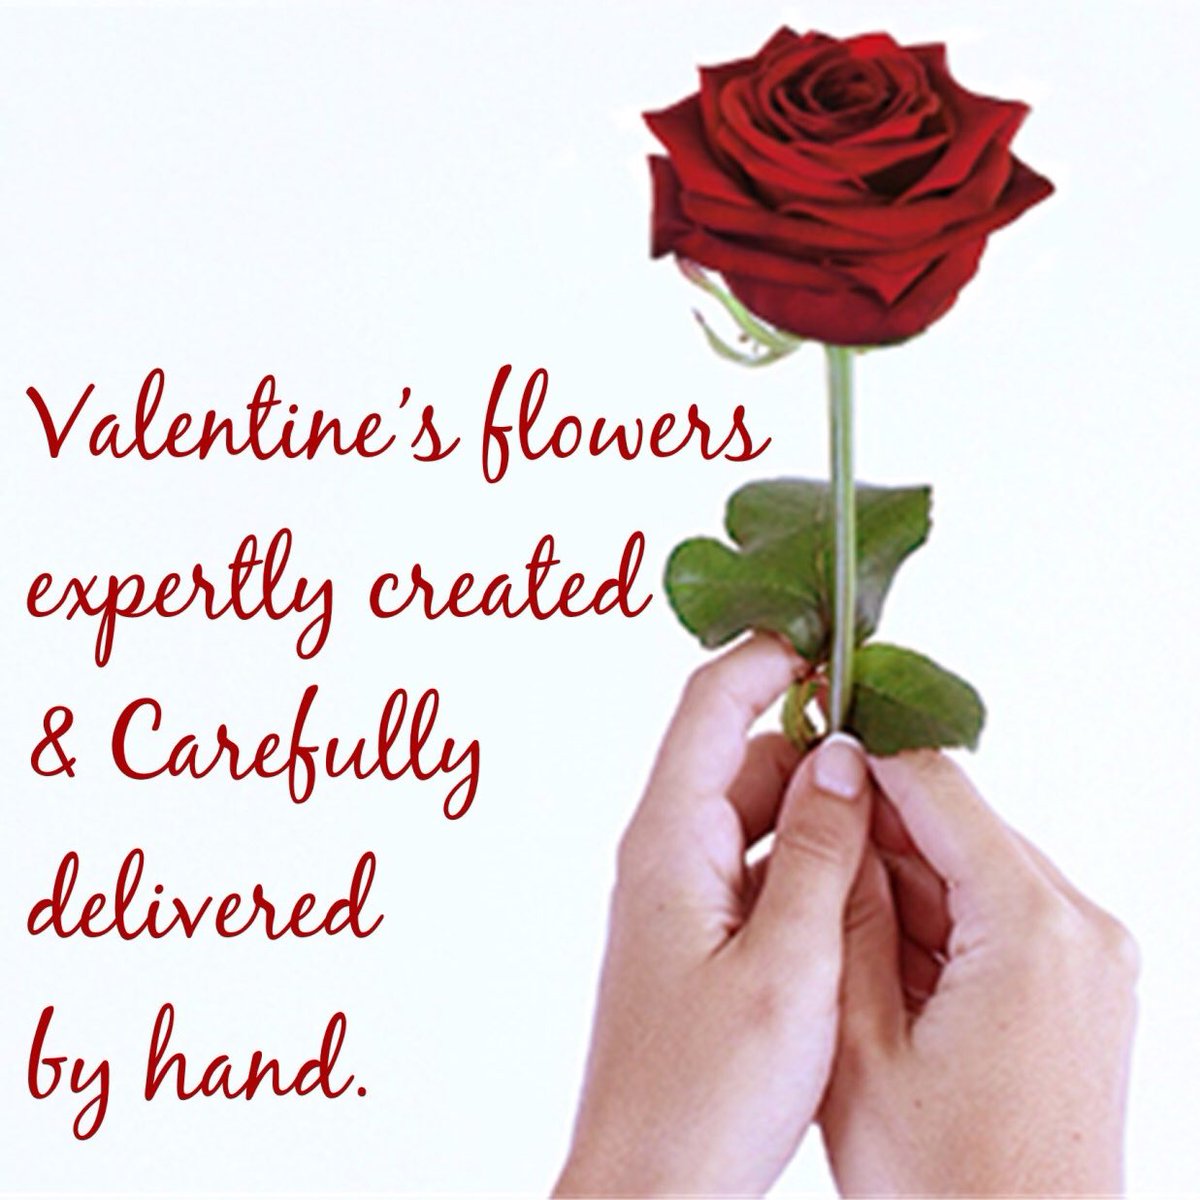 Valentine’s Day, Friday, 14th February 2020! Show your special someone just how much they mean to you. Call or visit our website to order! #ValentinesDay #Valentines #Roses #florist #pembrokeshire #pembrokeshireflorist #love #ValentinesGifts #ValentinesFlowers #ValentinesRoses